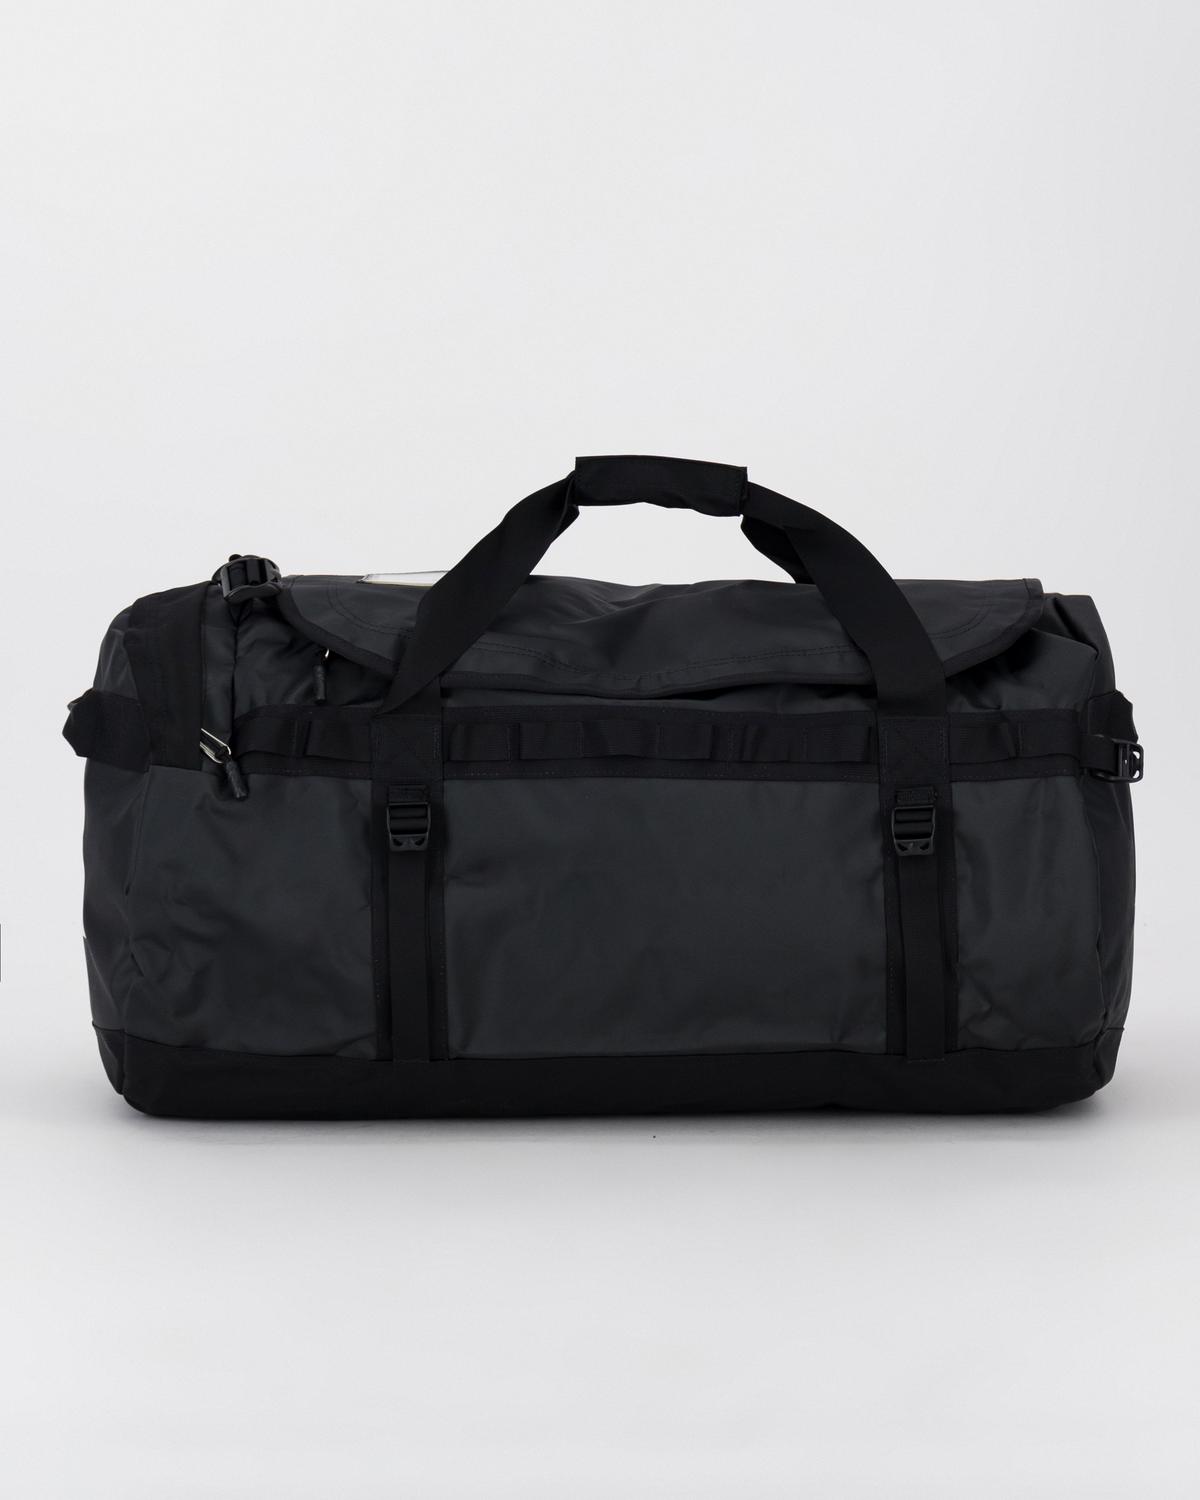 The North Face Large Base Camp Duffel Bag -  Black